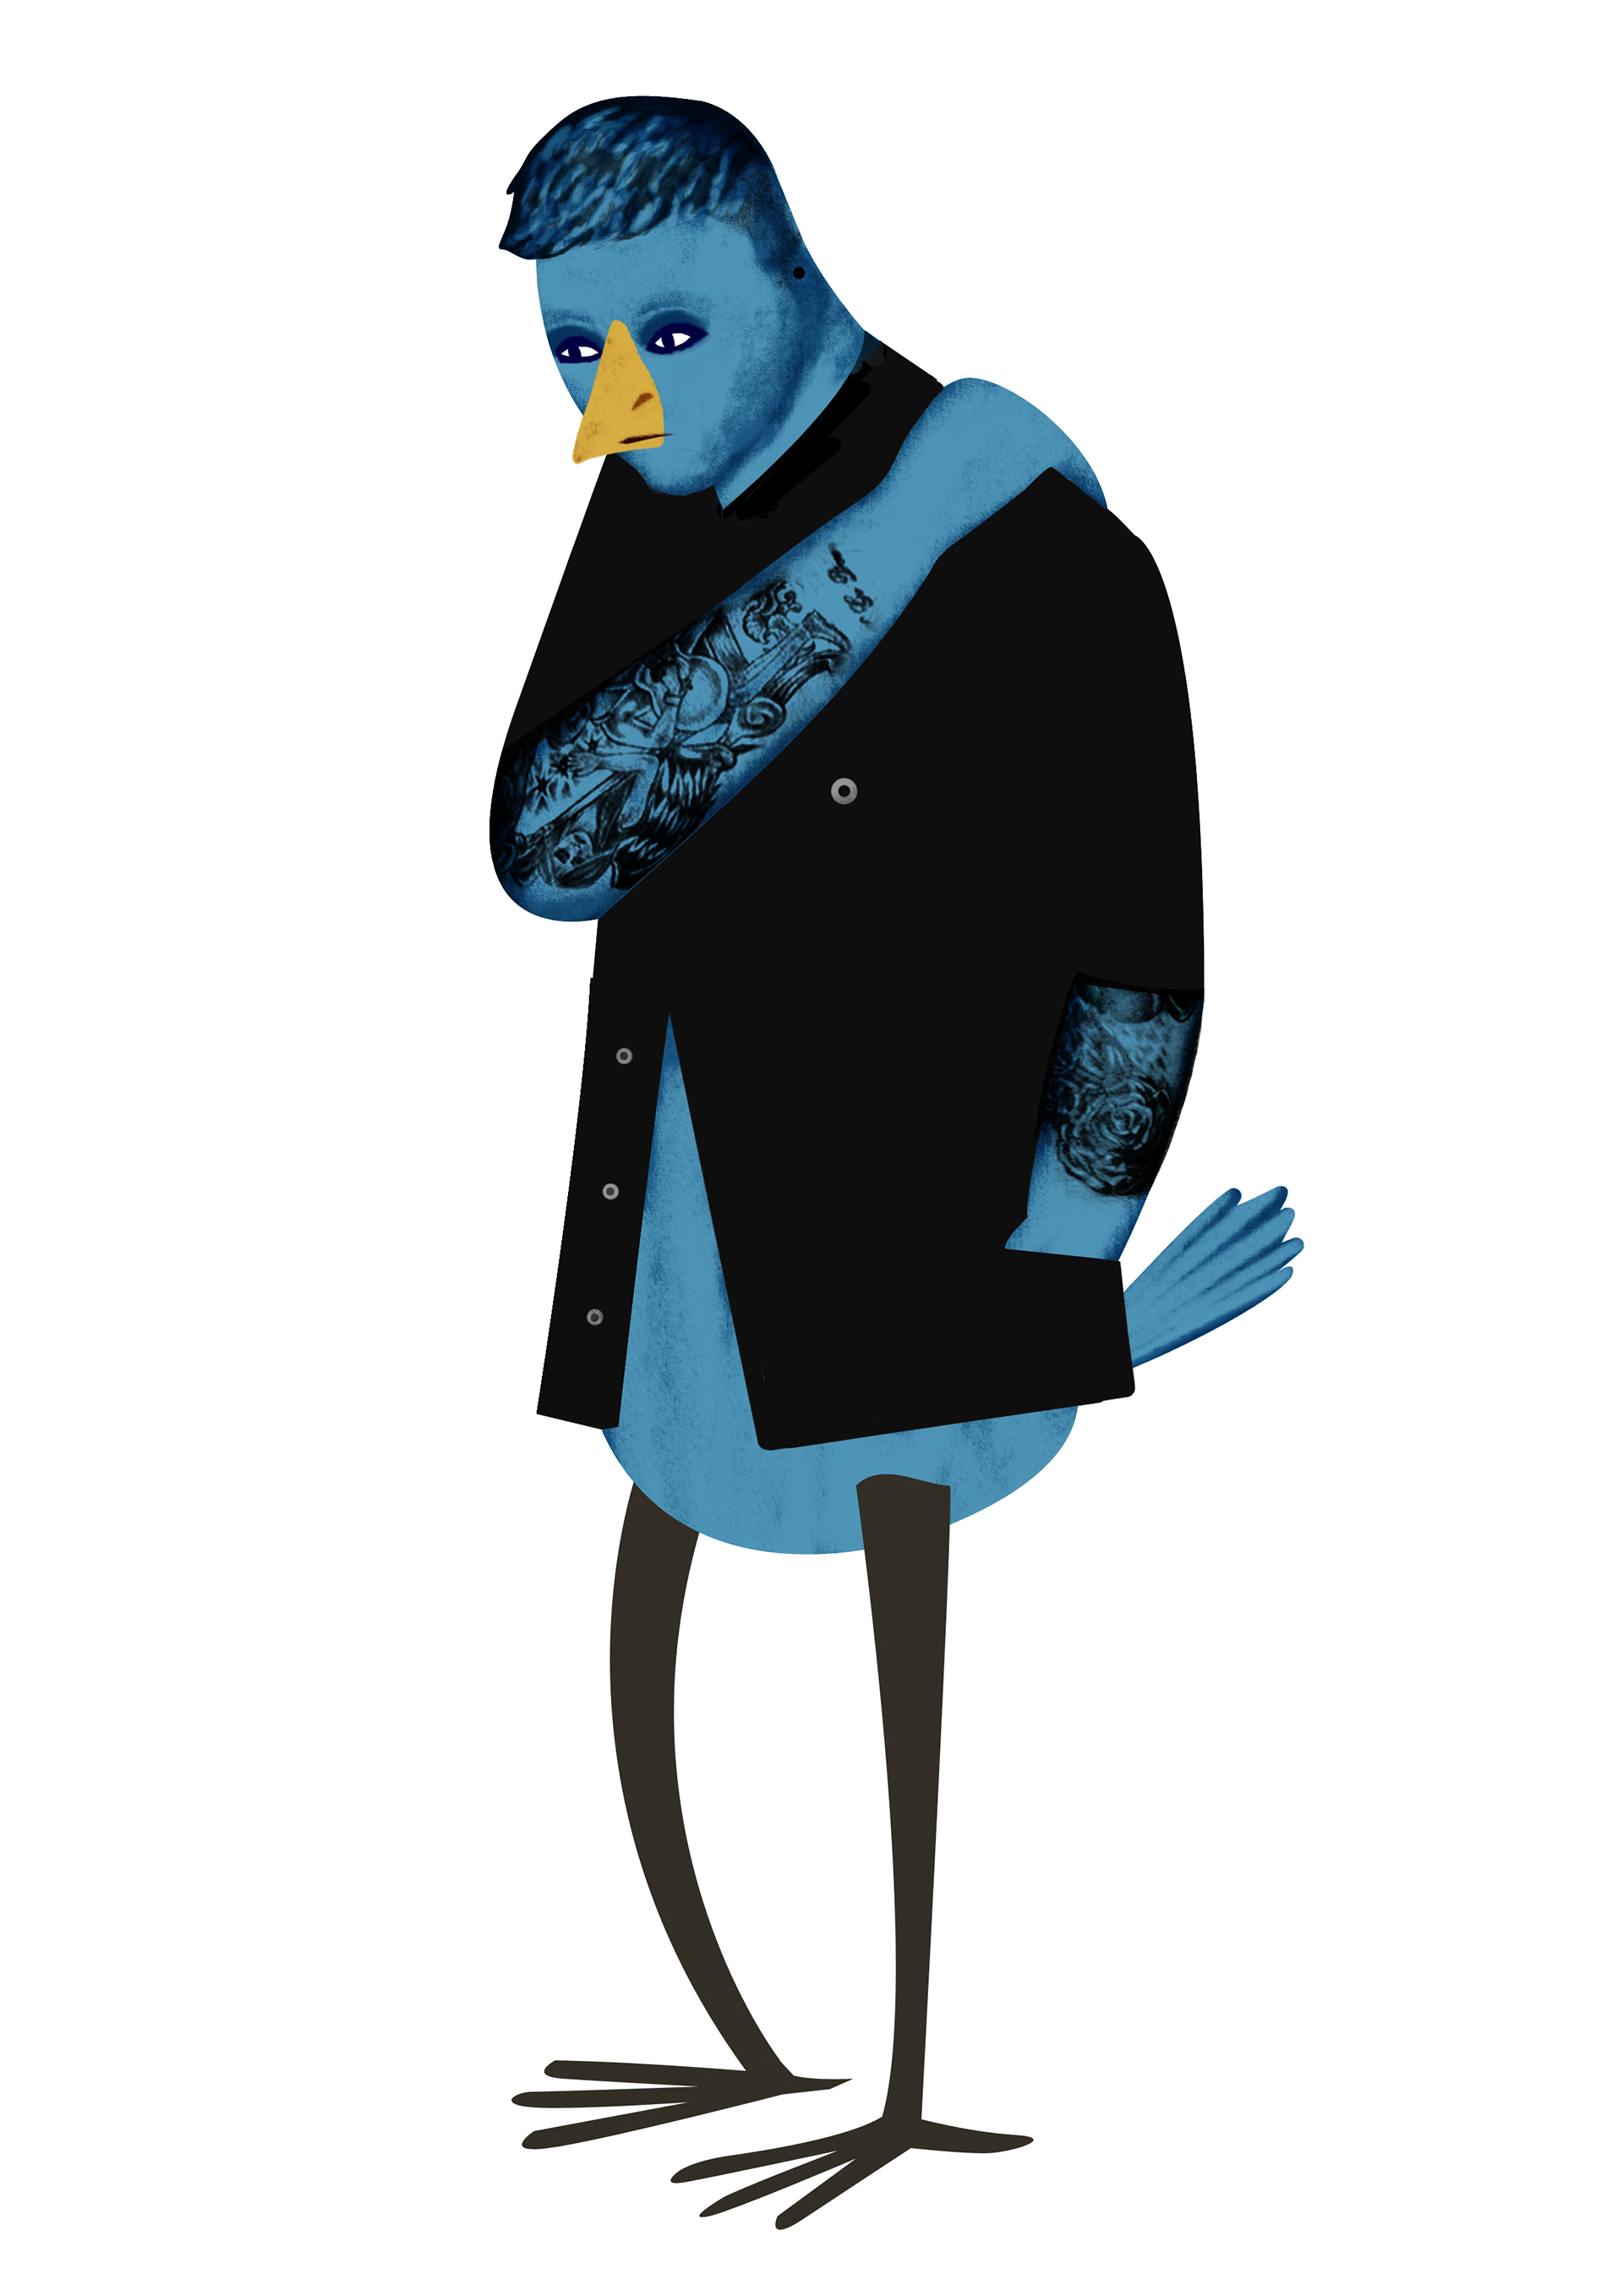 Character design for The Fact on Behance